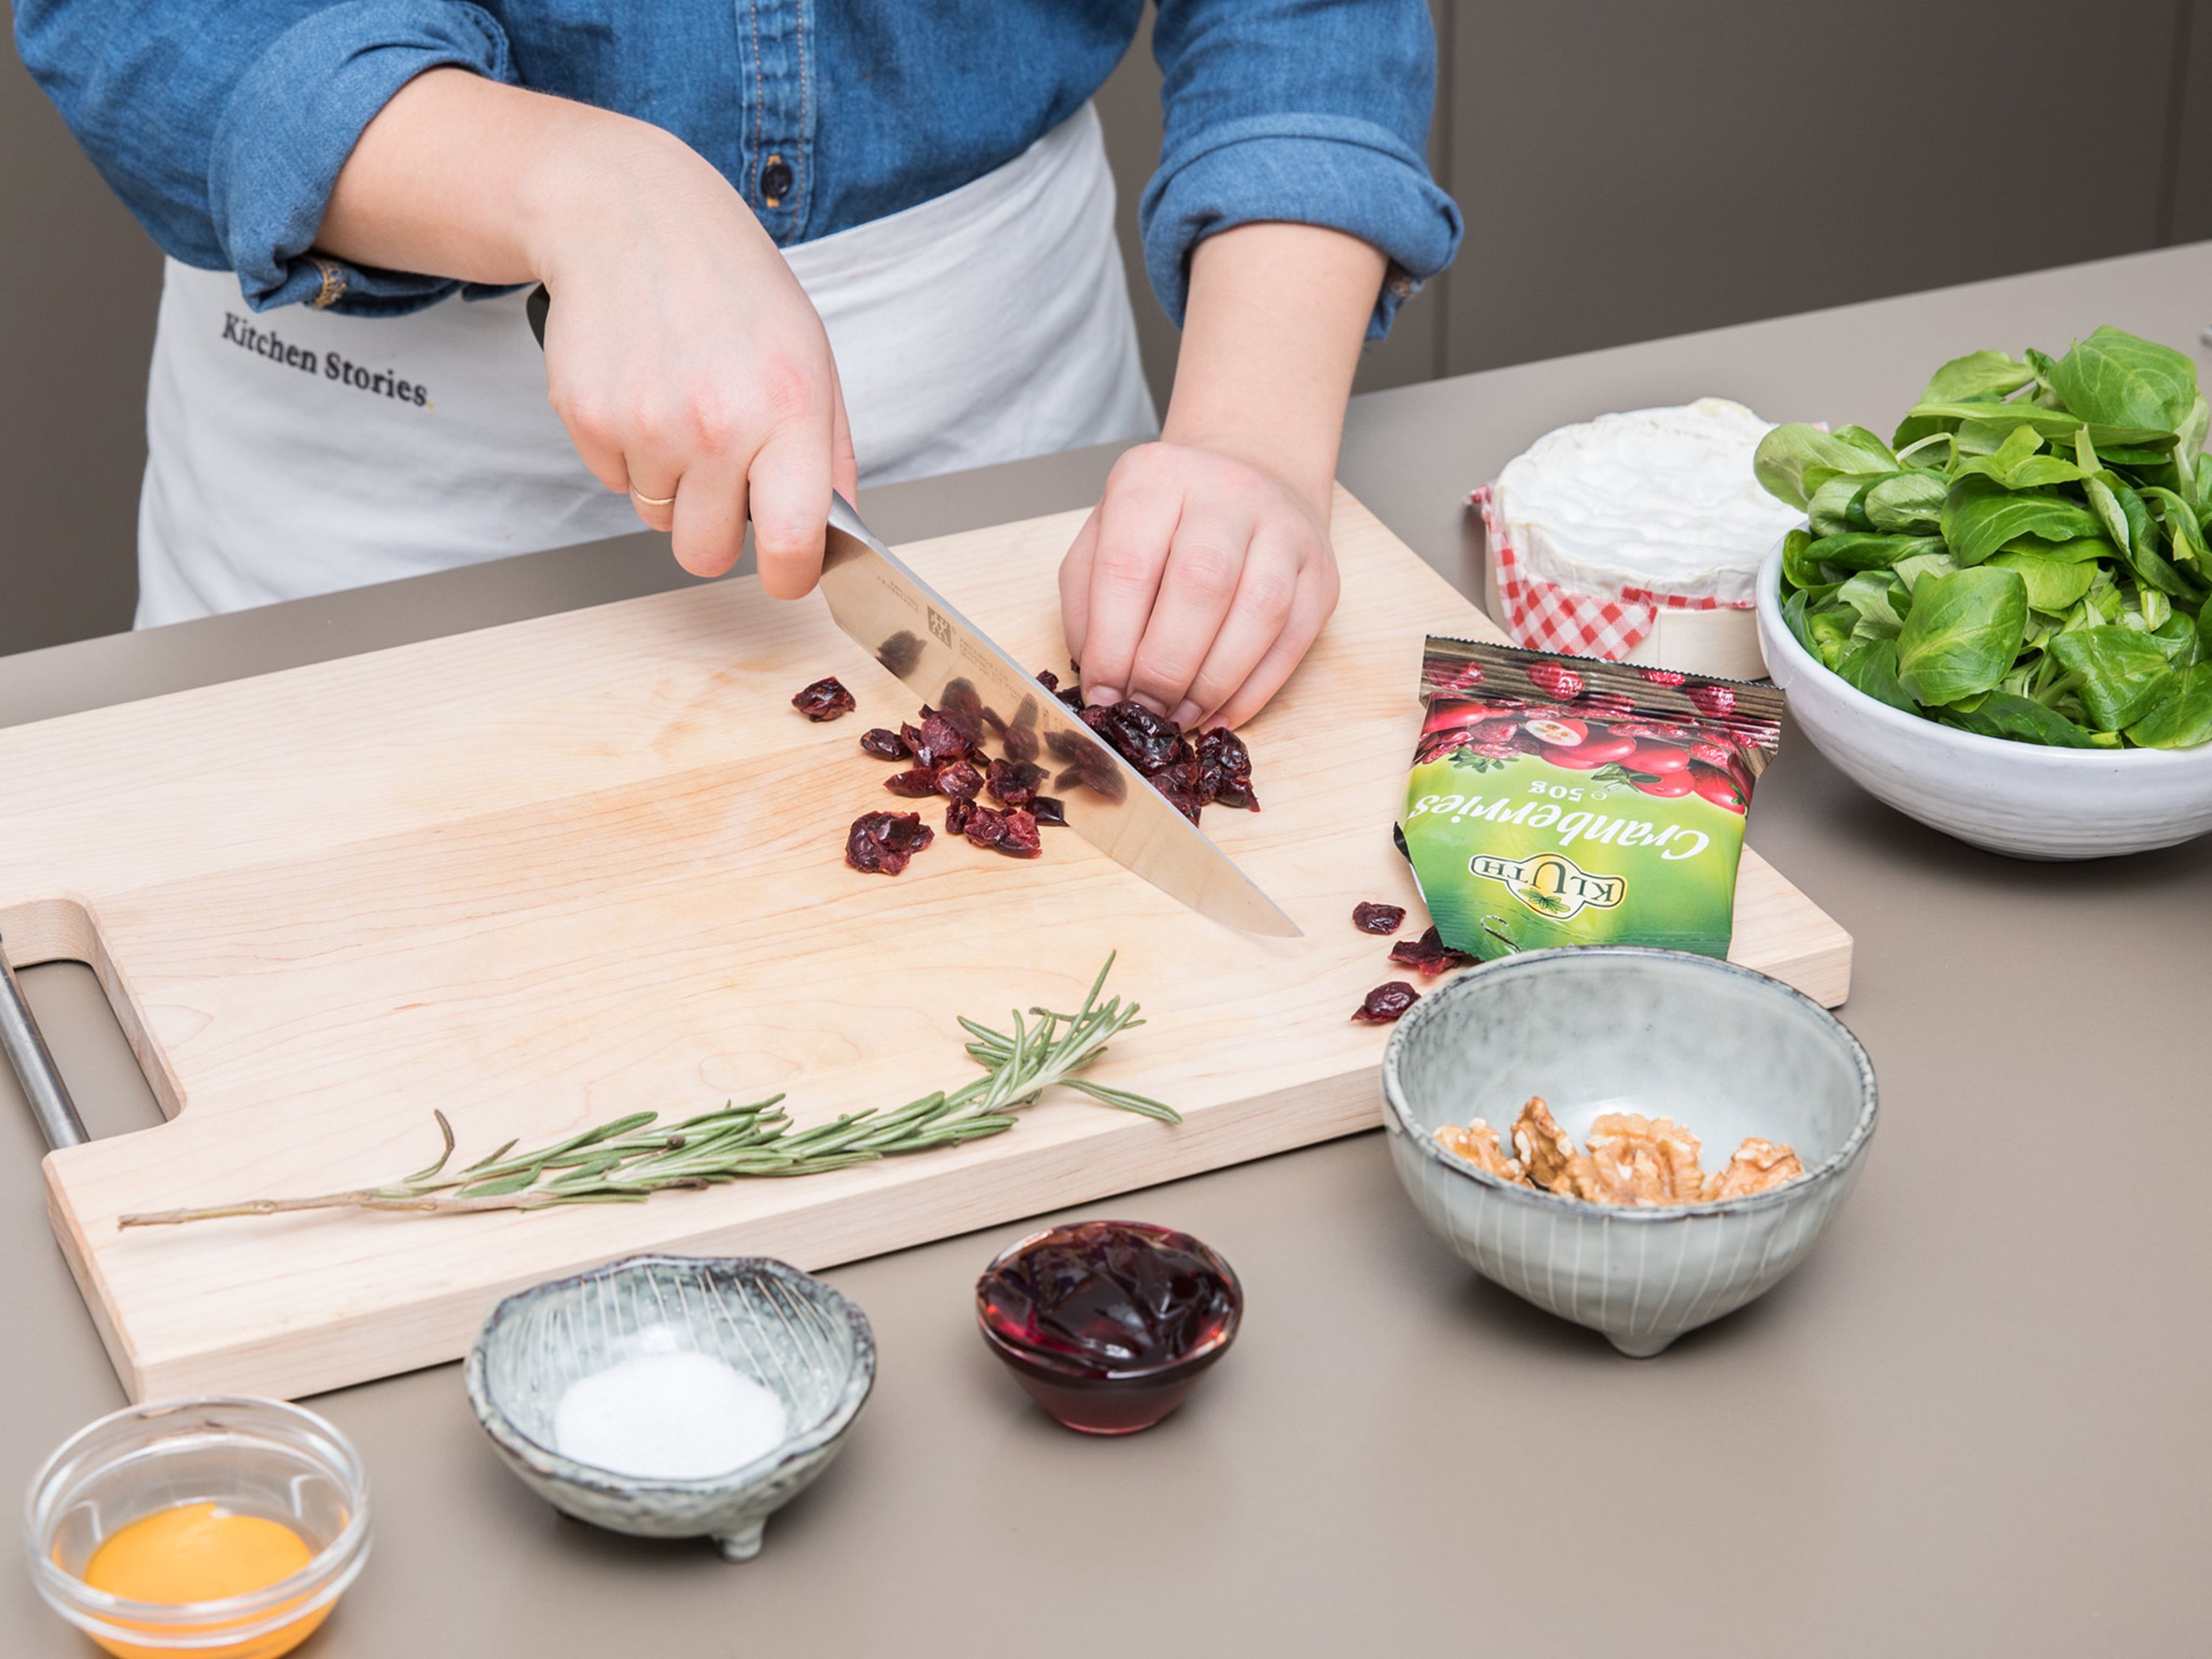 Preheat oven to 200°C/390°F. Roughly chop dried cranberries and walnuts, finely chop rosemary, and transfer to a bowl. Add cranberry sauce, salt, and pepper and mix well.